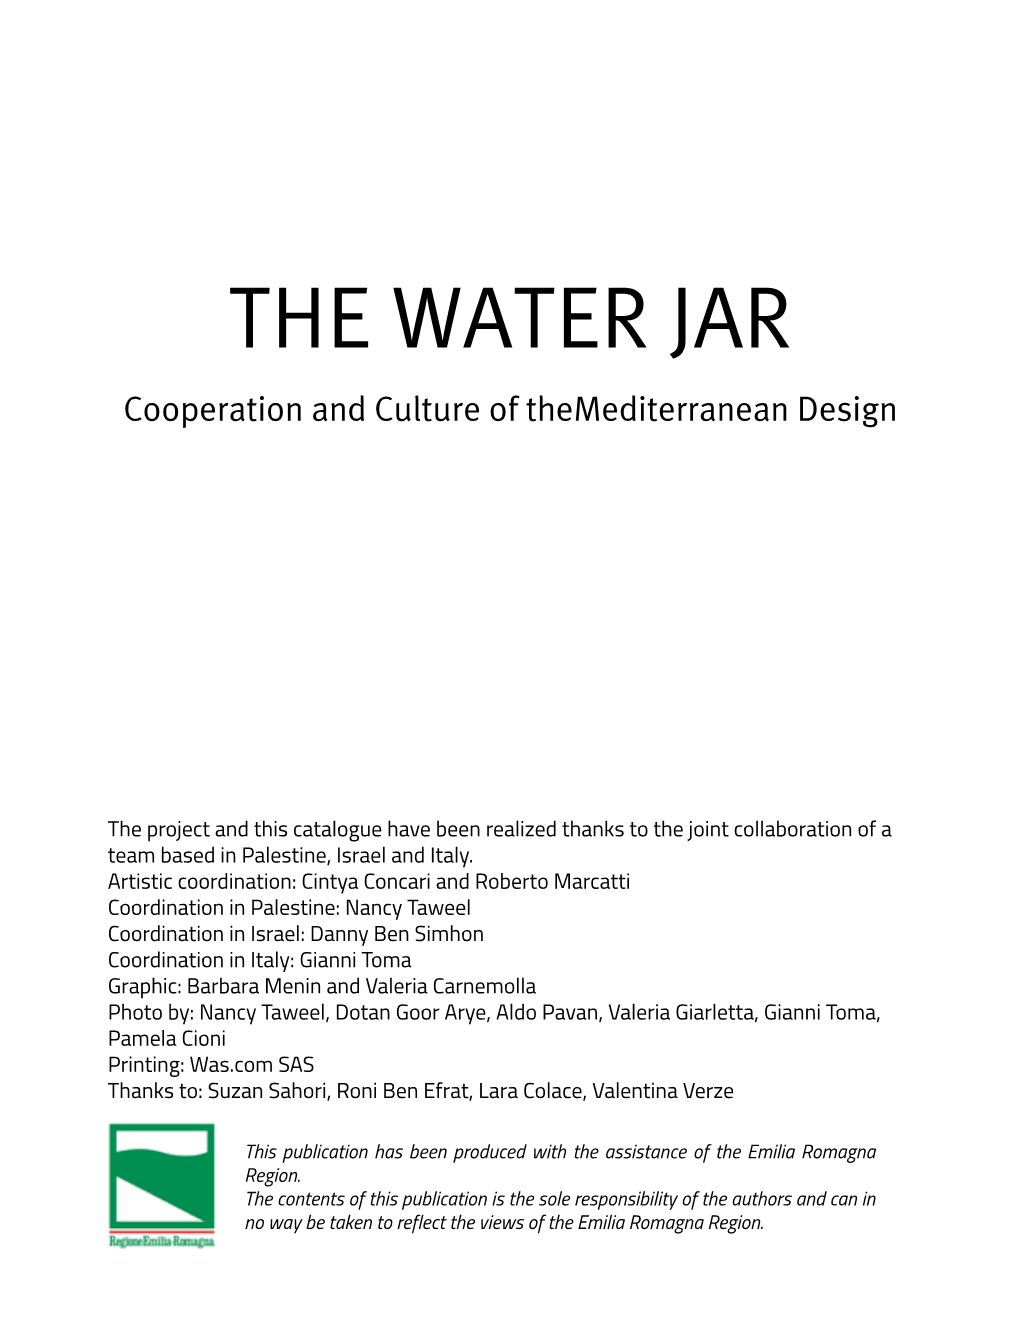 THE WATER JAR Cooperation and Culture of Themediterranean Design